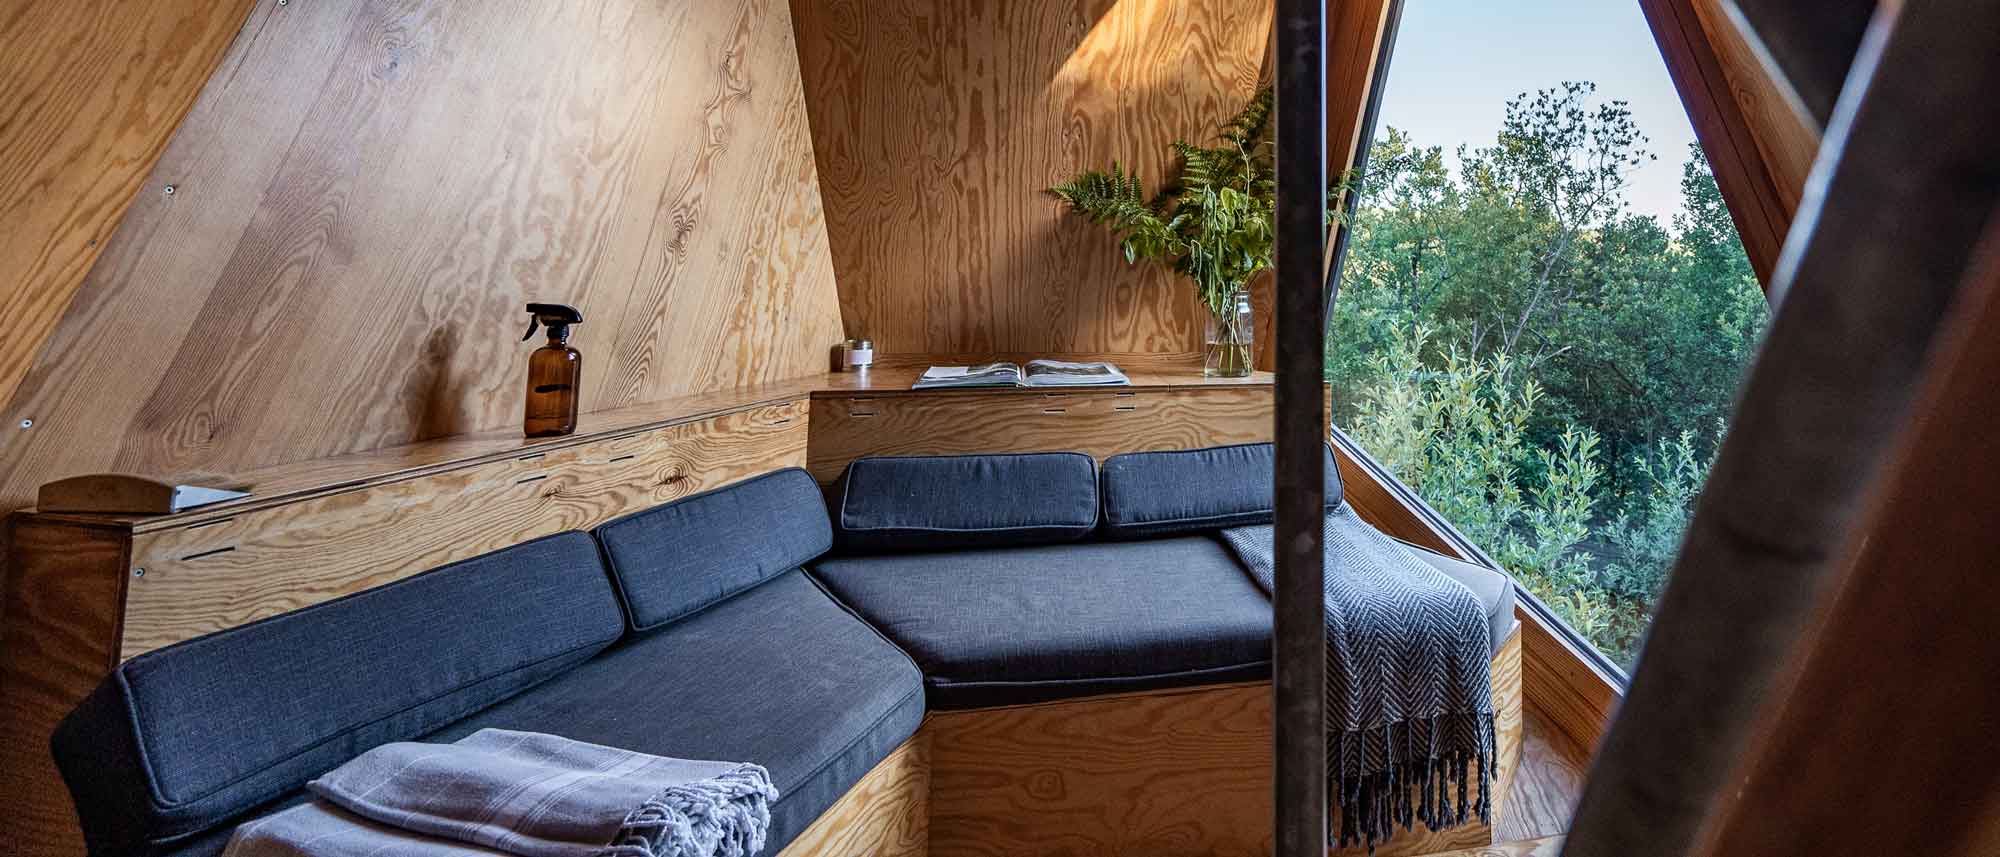 the interior of K3 Kudhva cabin, with a sofa and views through the window of woodland